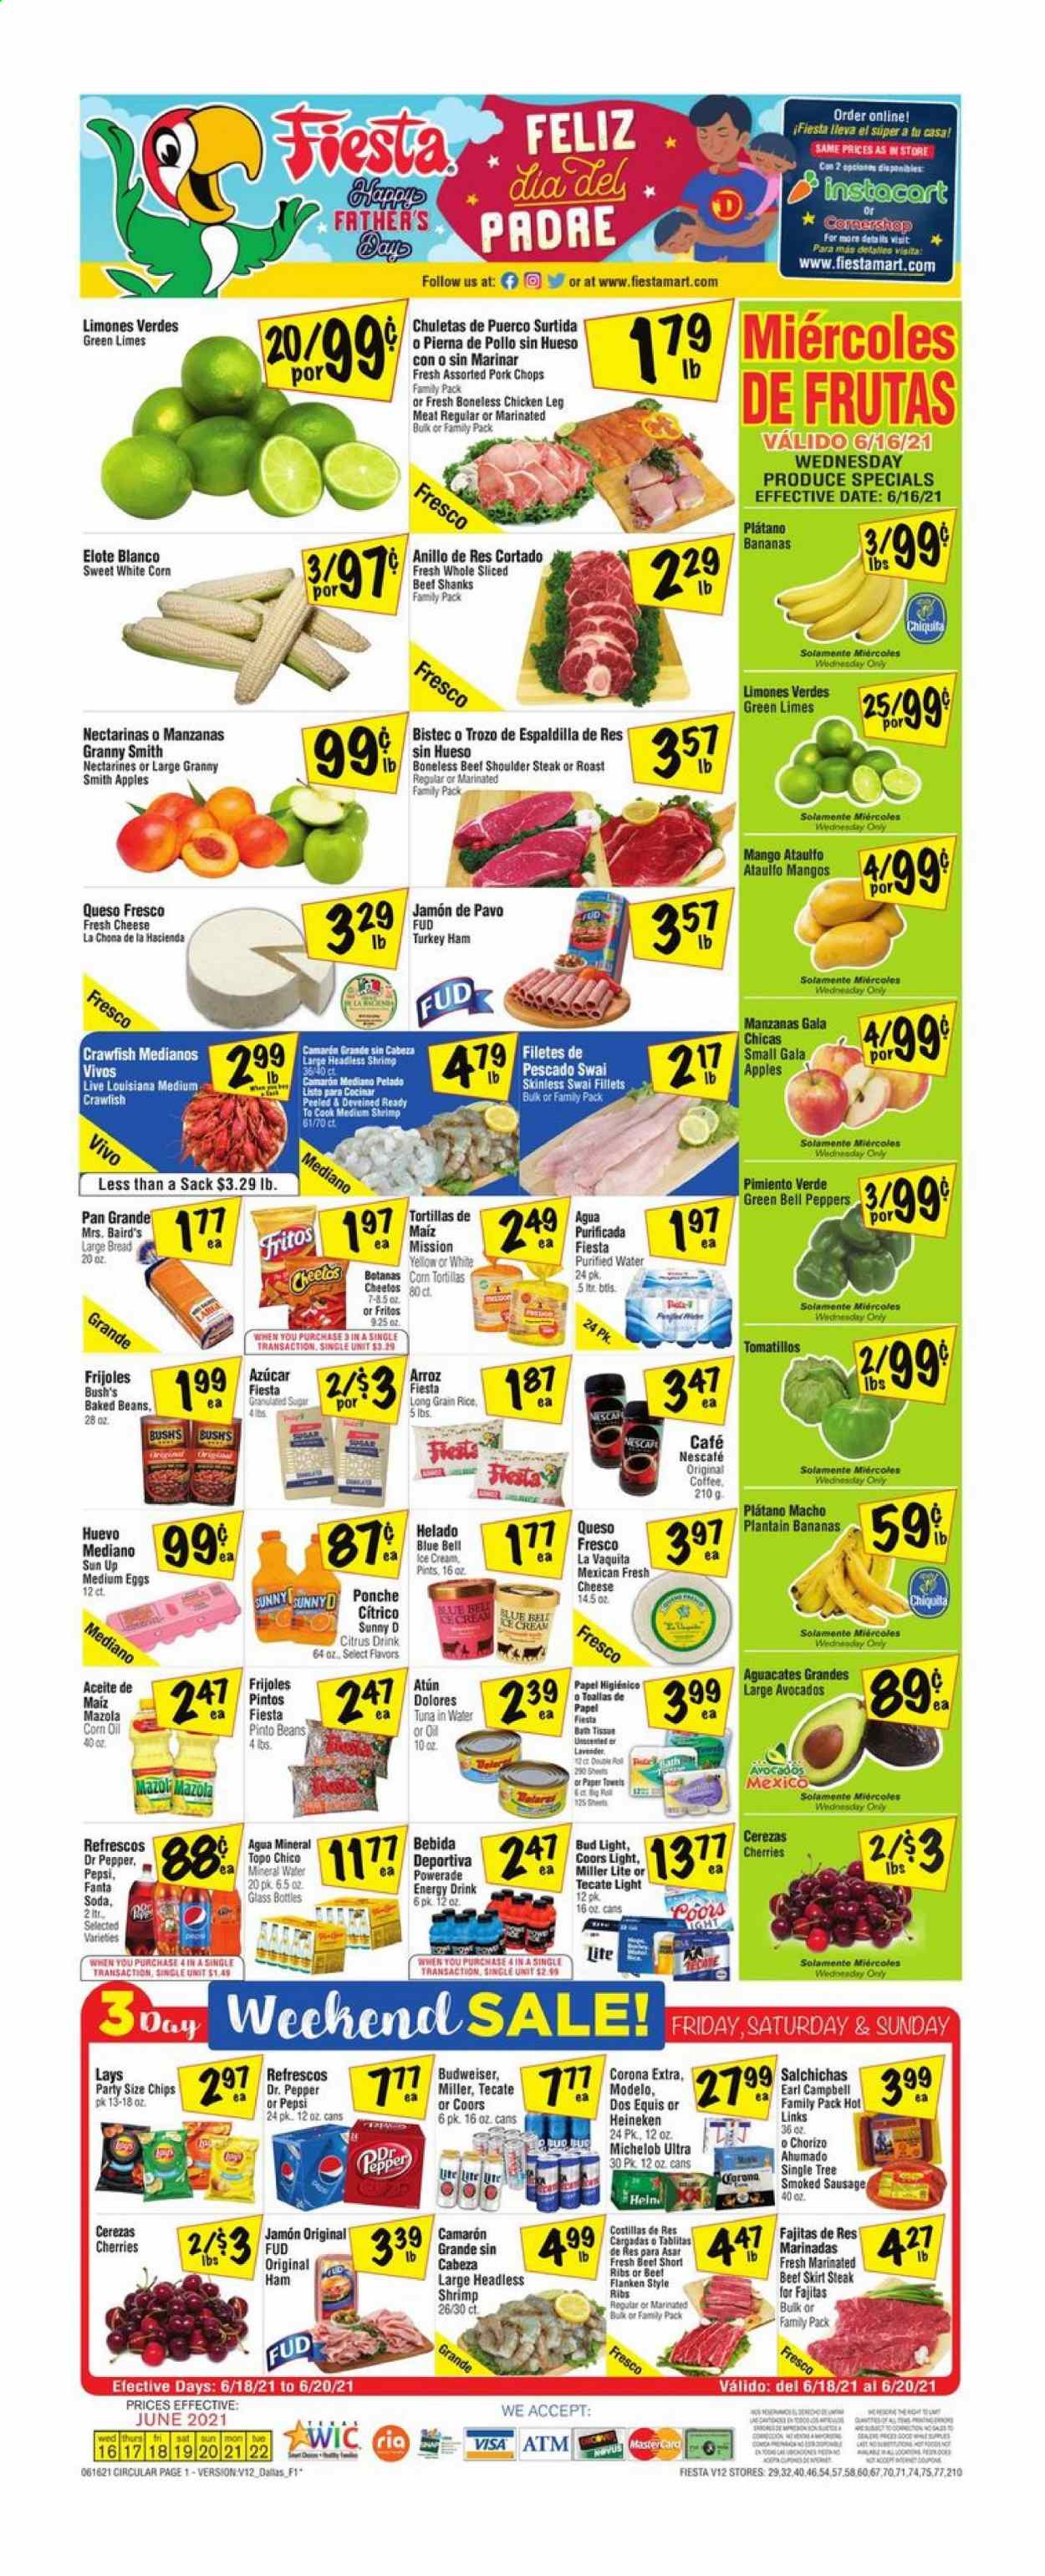 thumbnail - Fiesta Mart Flyer - 06/16/2021 - 06/22/2021 - Sales products - Budweiser, Miller Lite, Coors, Dos Equis, Michelob, bread, corn tortillas, tortillas, bell peppers, tomatillo, peppers, apples, avocado, Gala, limes, mango, cherries, Granny Smith, tuna, shrimps, swai fillet, fajita, ham, chorizo, smoked sausage, queso fresco, cheese, eggs, ice cream, Blue Bell, crawfish, Fritos, Cheetos, chips, Lay’s, granulated sugar, sugar, tuna in water, pinto beans, baked beans, rice, long grain rice, corn oil, Powerade, Pepsi, Fanta, energy drink, Dr. Pepper, fruit punch, soda, purified water, coffee, Nescafé, beer, Bud Light, Corona Extra, Heineken, Modelo, chicken legs, steak, marinated beef, pork chops, pork meat, kitchen towels, paper towels, nectarines. Page 1.